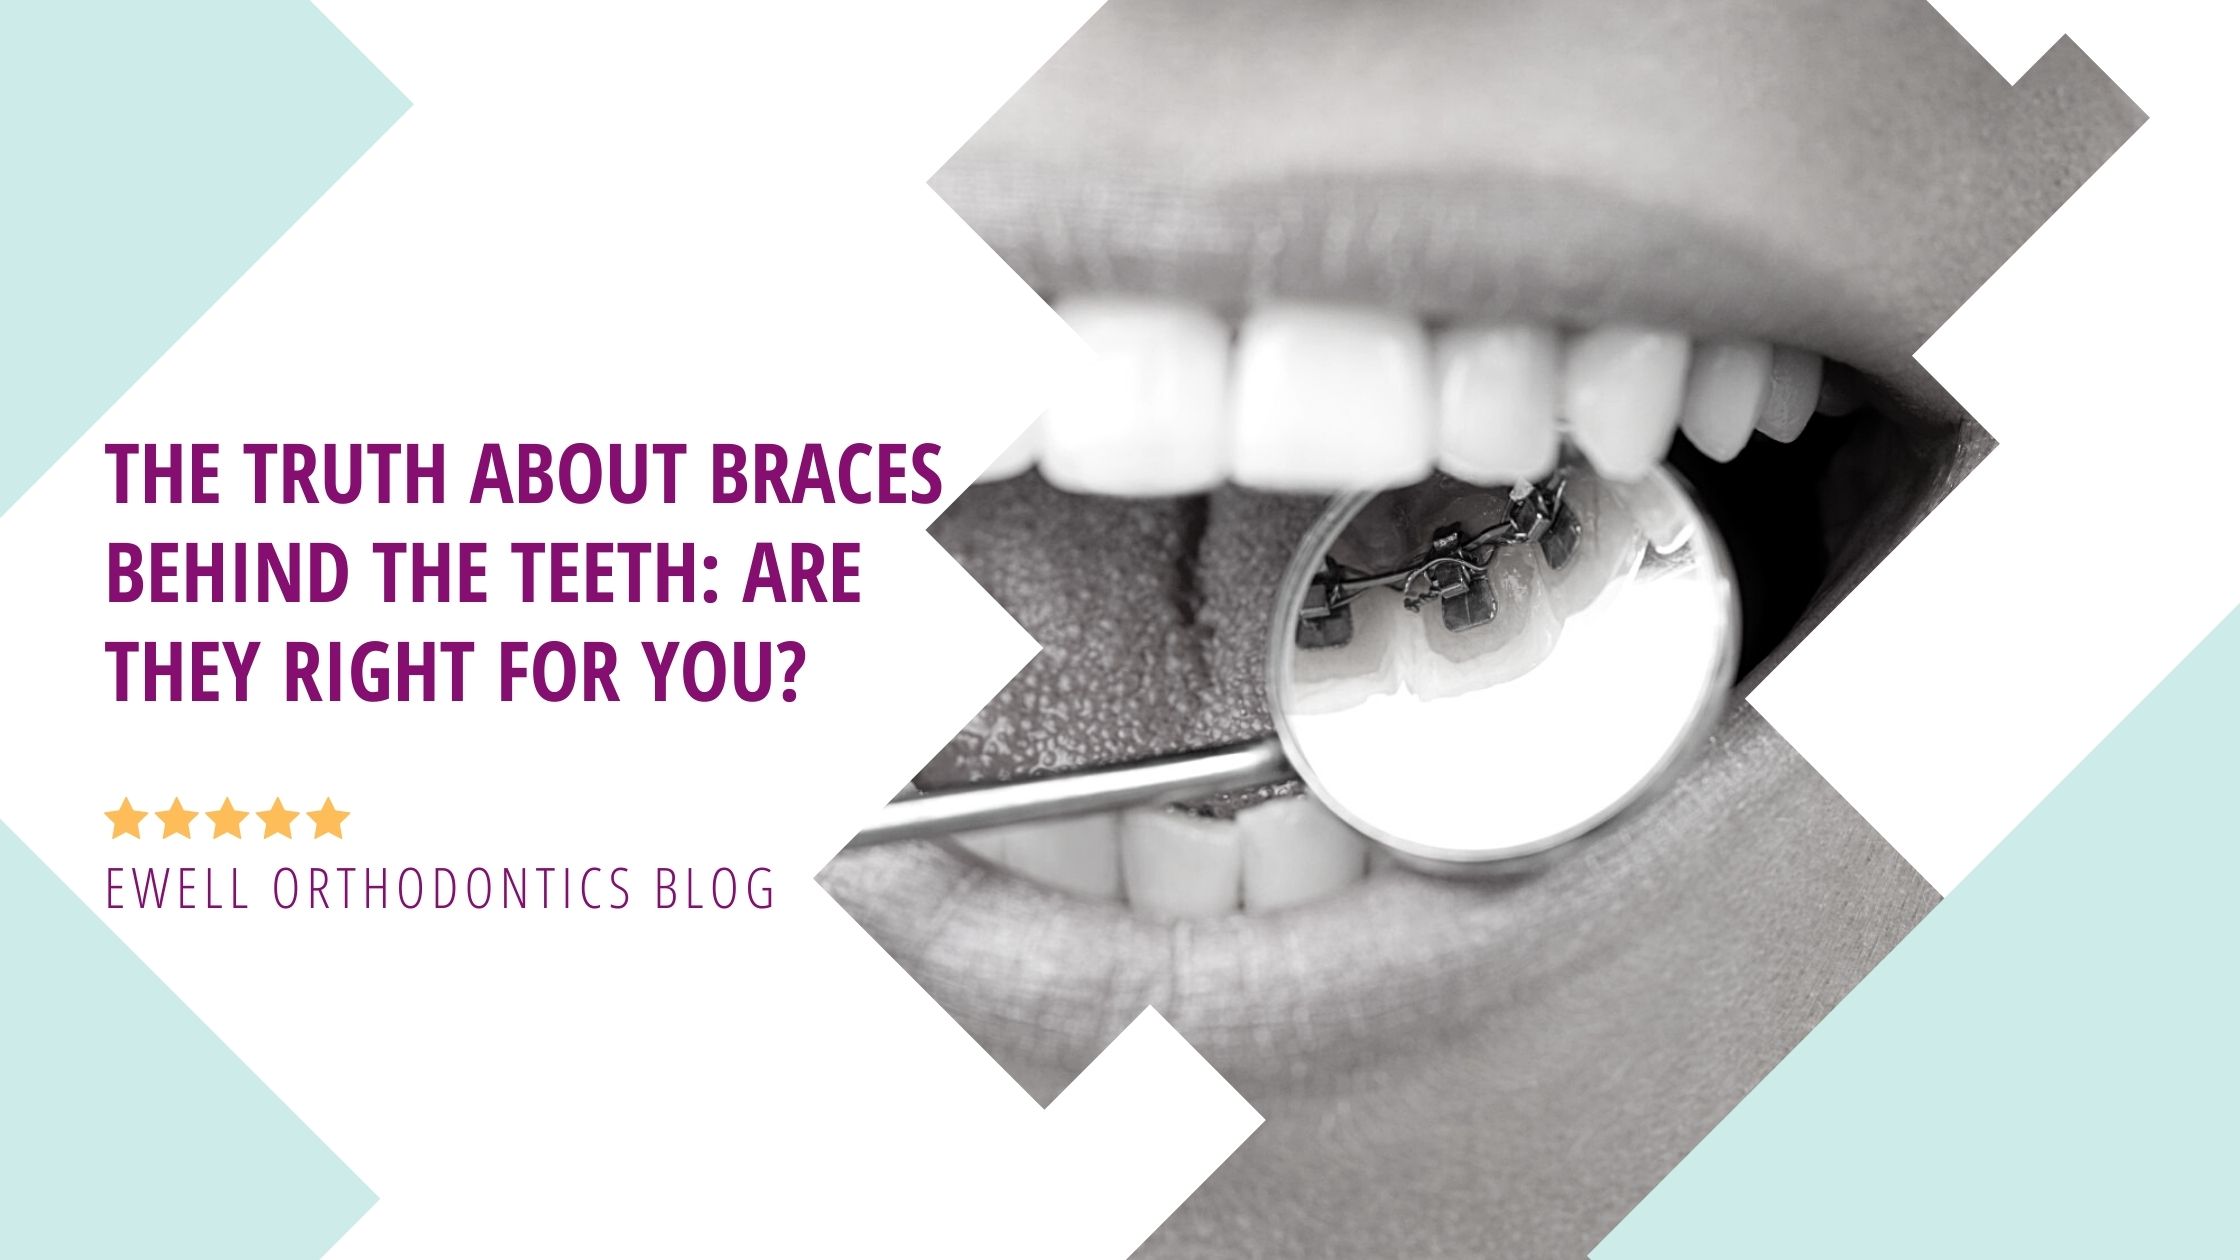 10 Questions To Ask Before Getting Braces